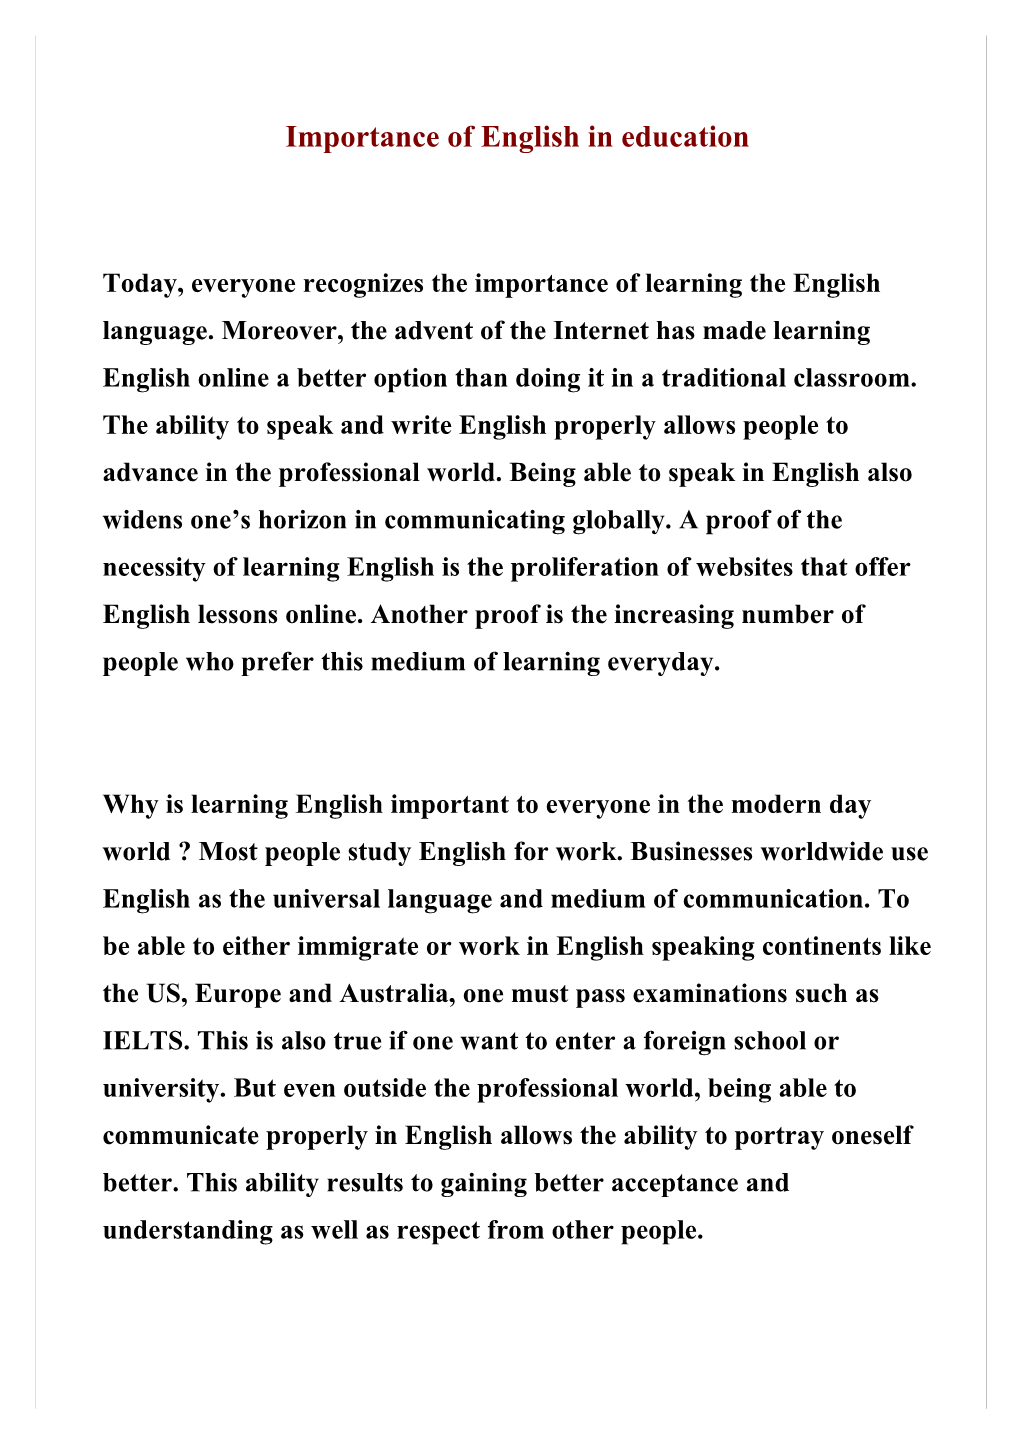 Importance of English in Education